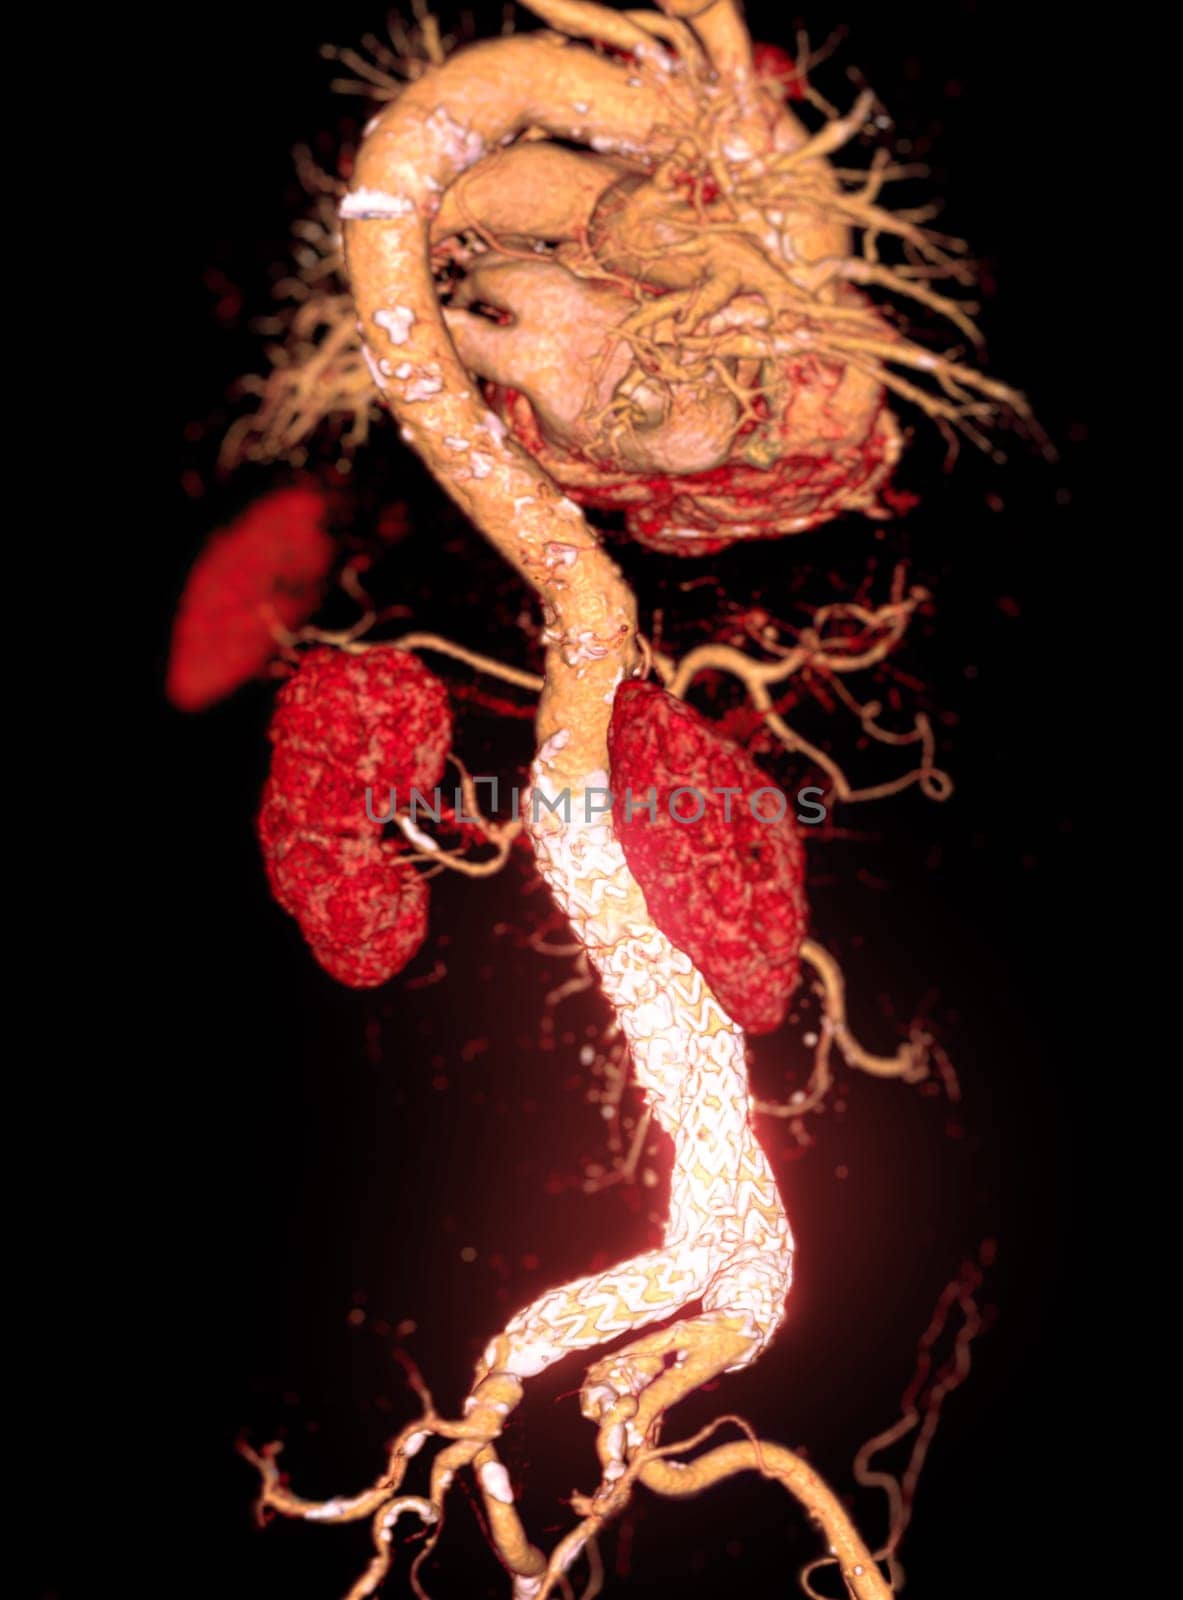 CTA whole aorta with Abdominal aorta stent graft 3D rendering image in case  abdominal aortic aneurysms. by samunella